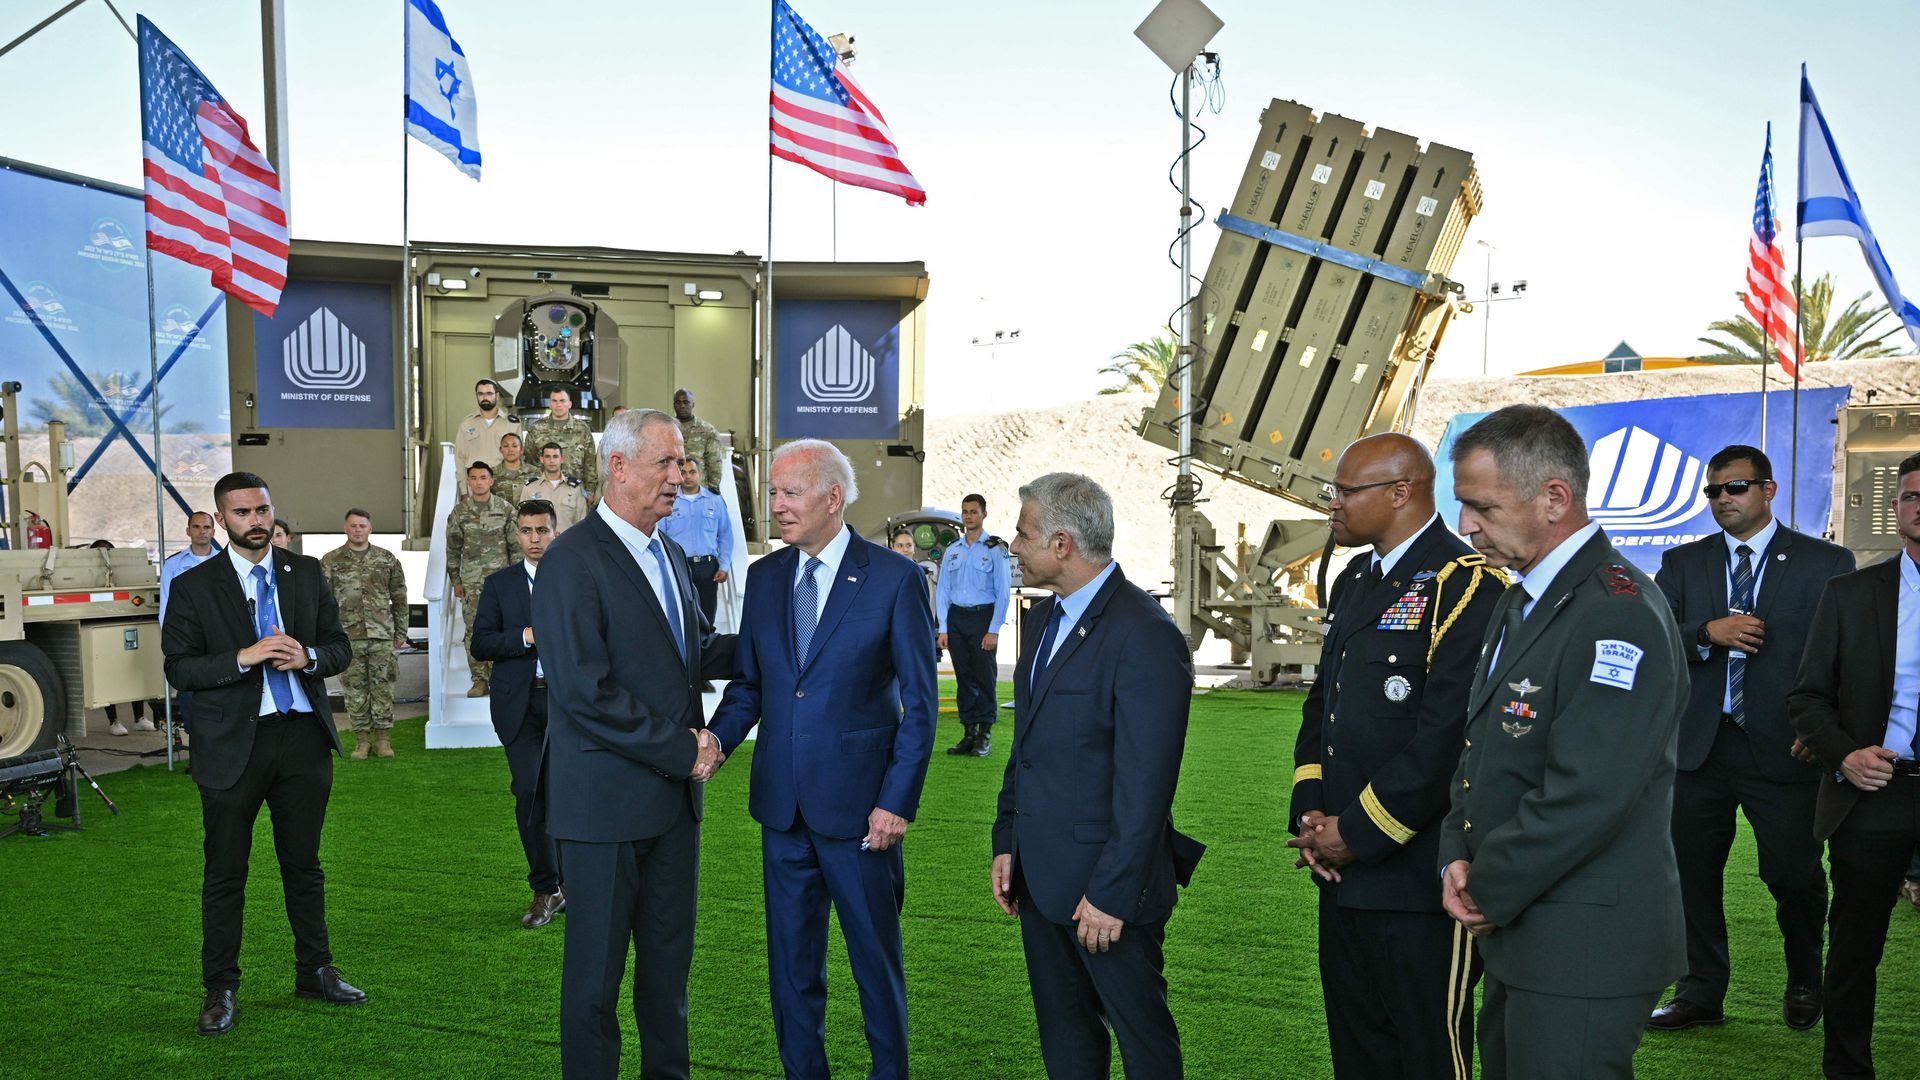  Biden (2nd R) shakes hands with Israeli Defence Minister Benny Gantz (L) as they tour with caretaker Prime Minister Yair Lapid (C), 